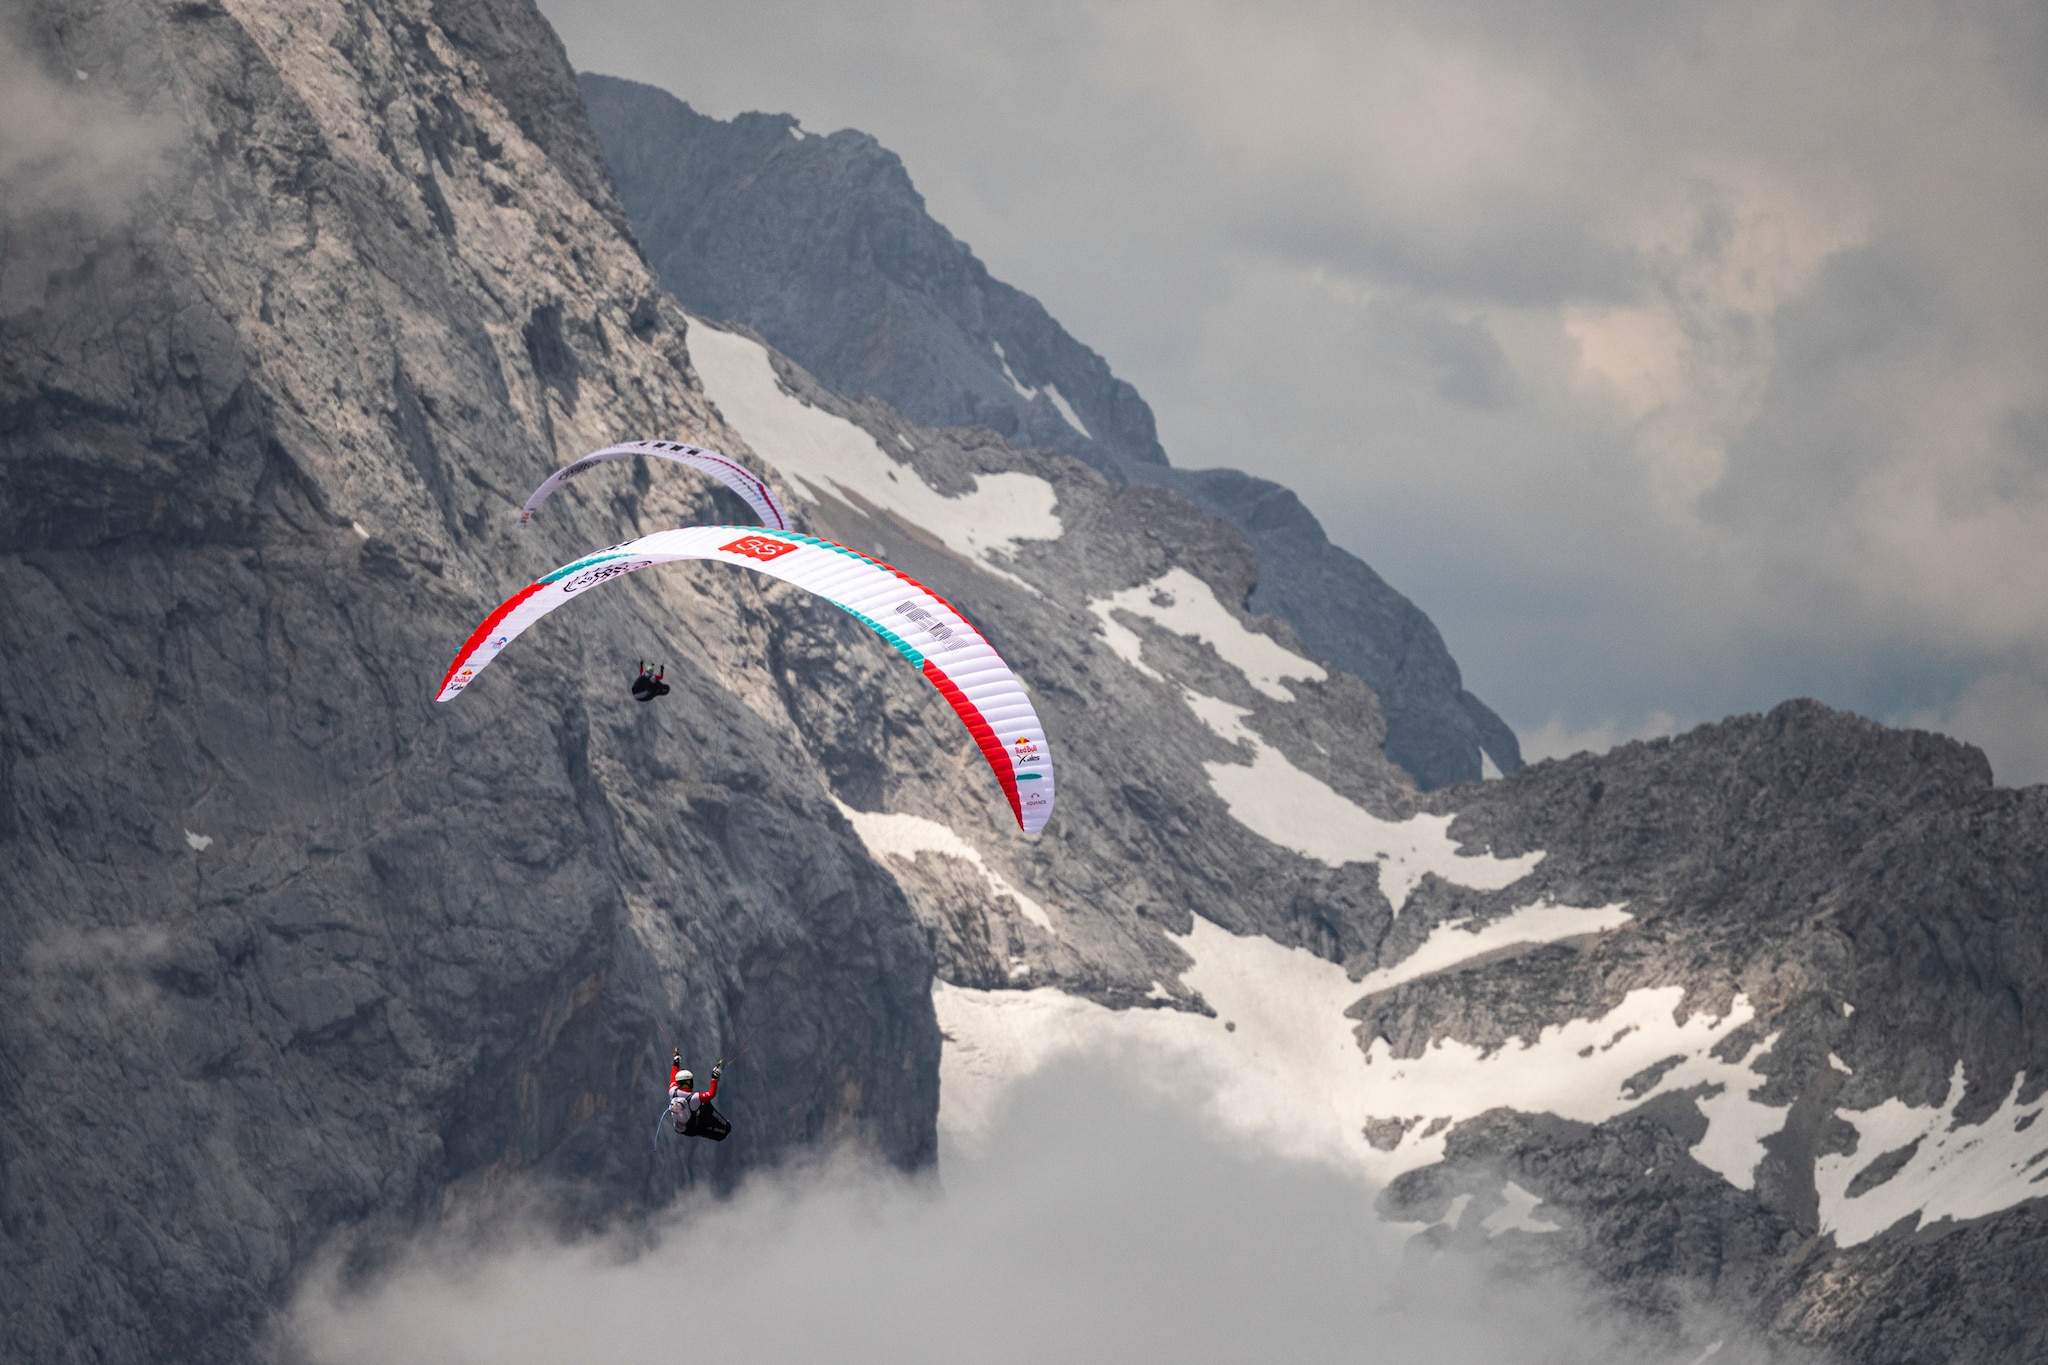 Patrick von Känel (SUI2) and Benoit Outters (FRA2) race at the Zugspitze prior to the Red Bull X-Alps, Germany on June 22, 2021.